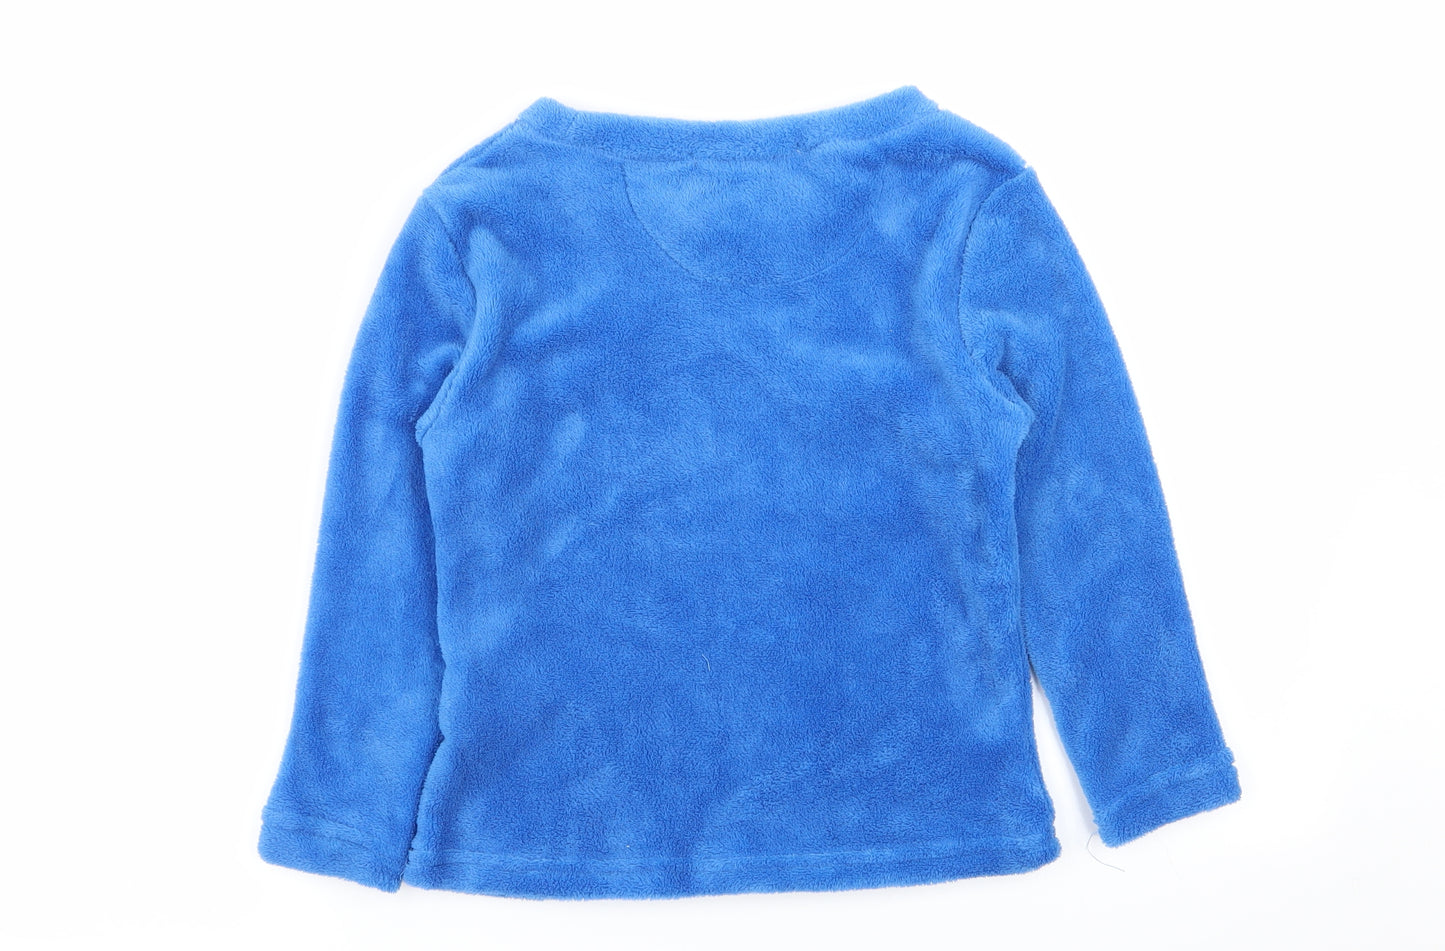 chill out Boys Blue Solid   Pyjama Top Size 6-7 Years